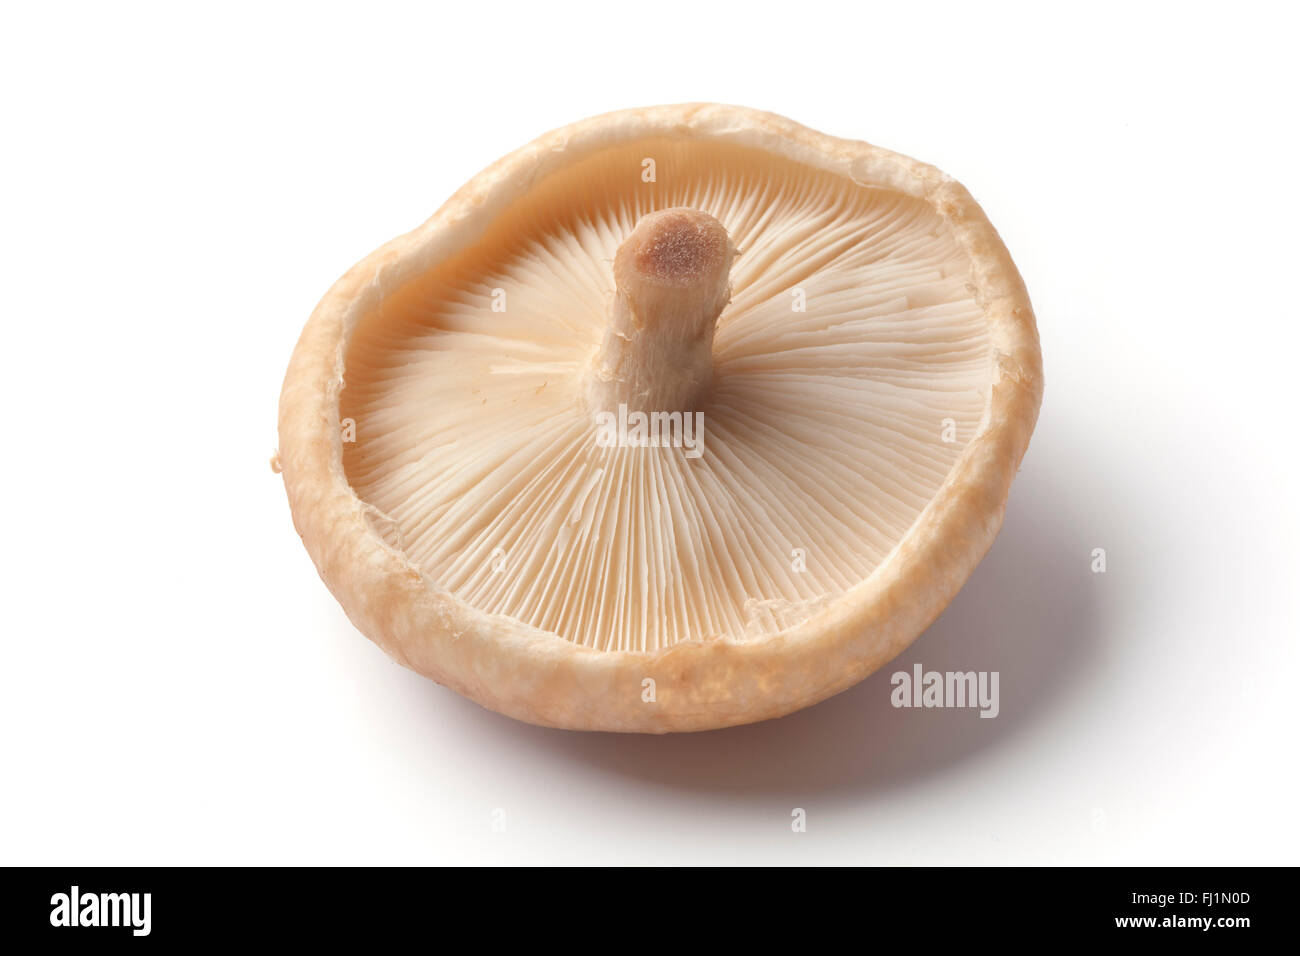 A selection of Shitake Mushrooms Stock Photo by ©antoine2000 2998995